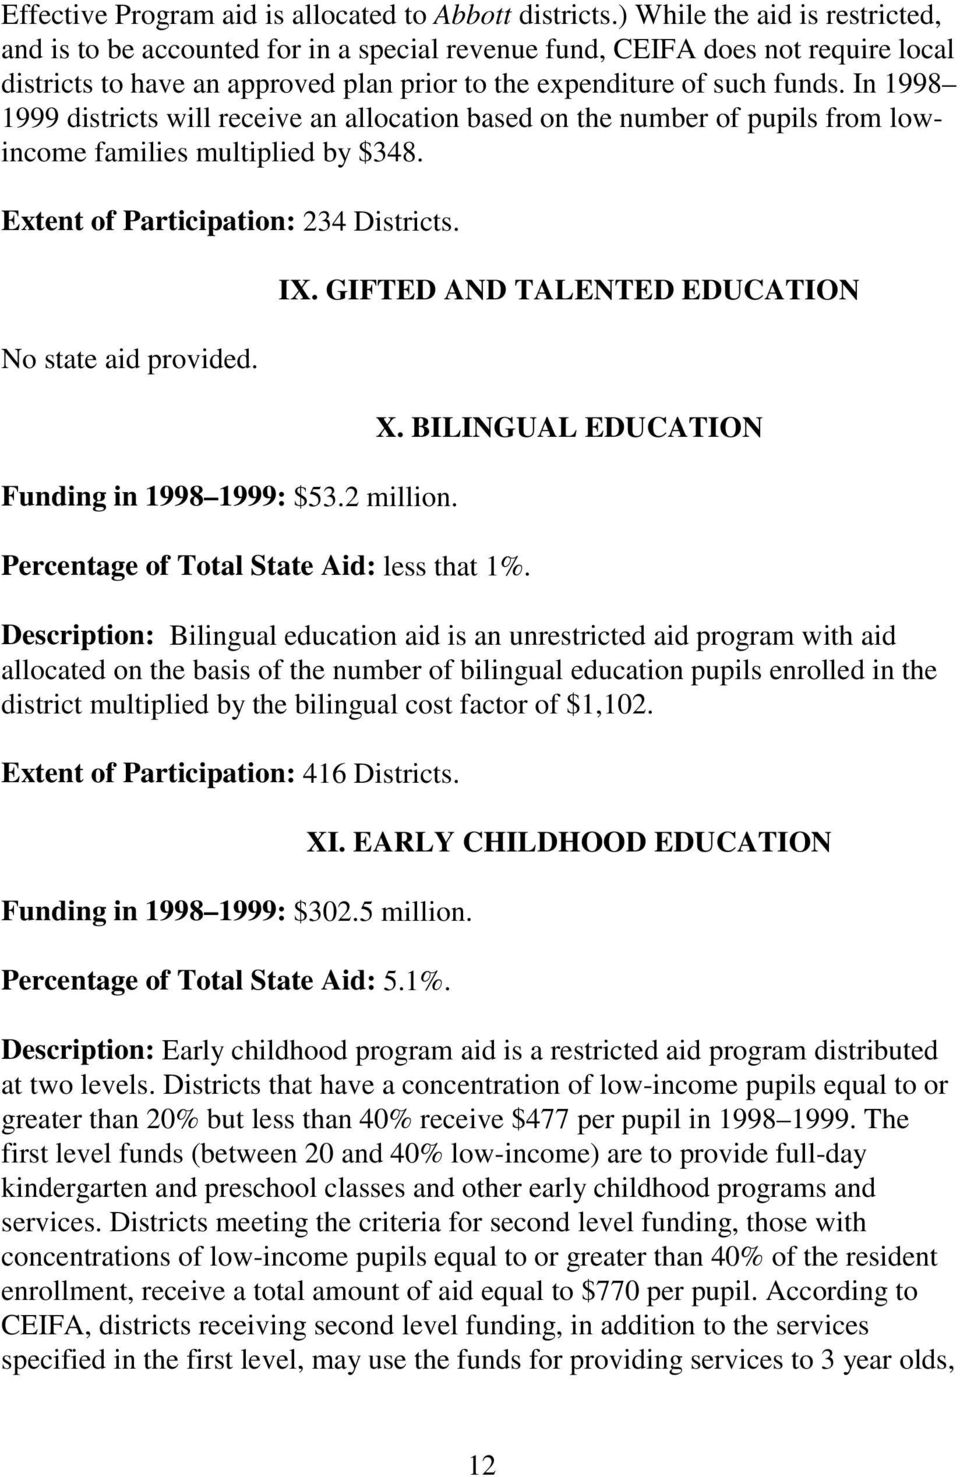 In 1998 1999 districts will receive an allocation based on the number of pupils from lowincome families multiplied by $348. Extent of Participation: 234 Districts. No state aid provided.